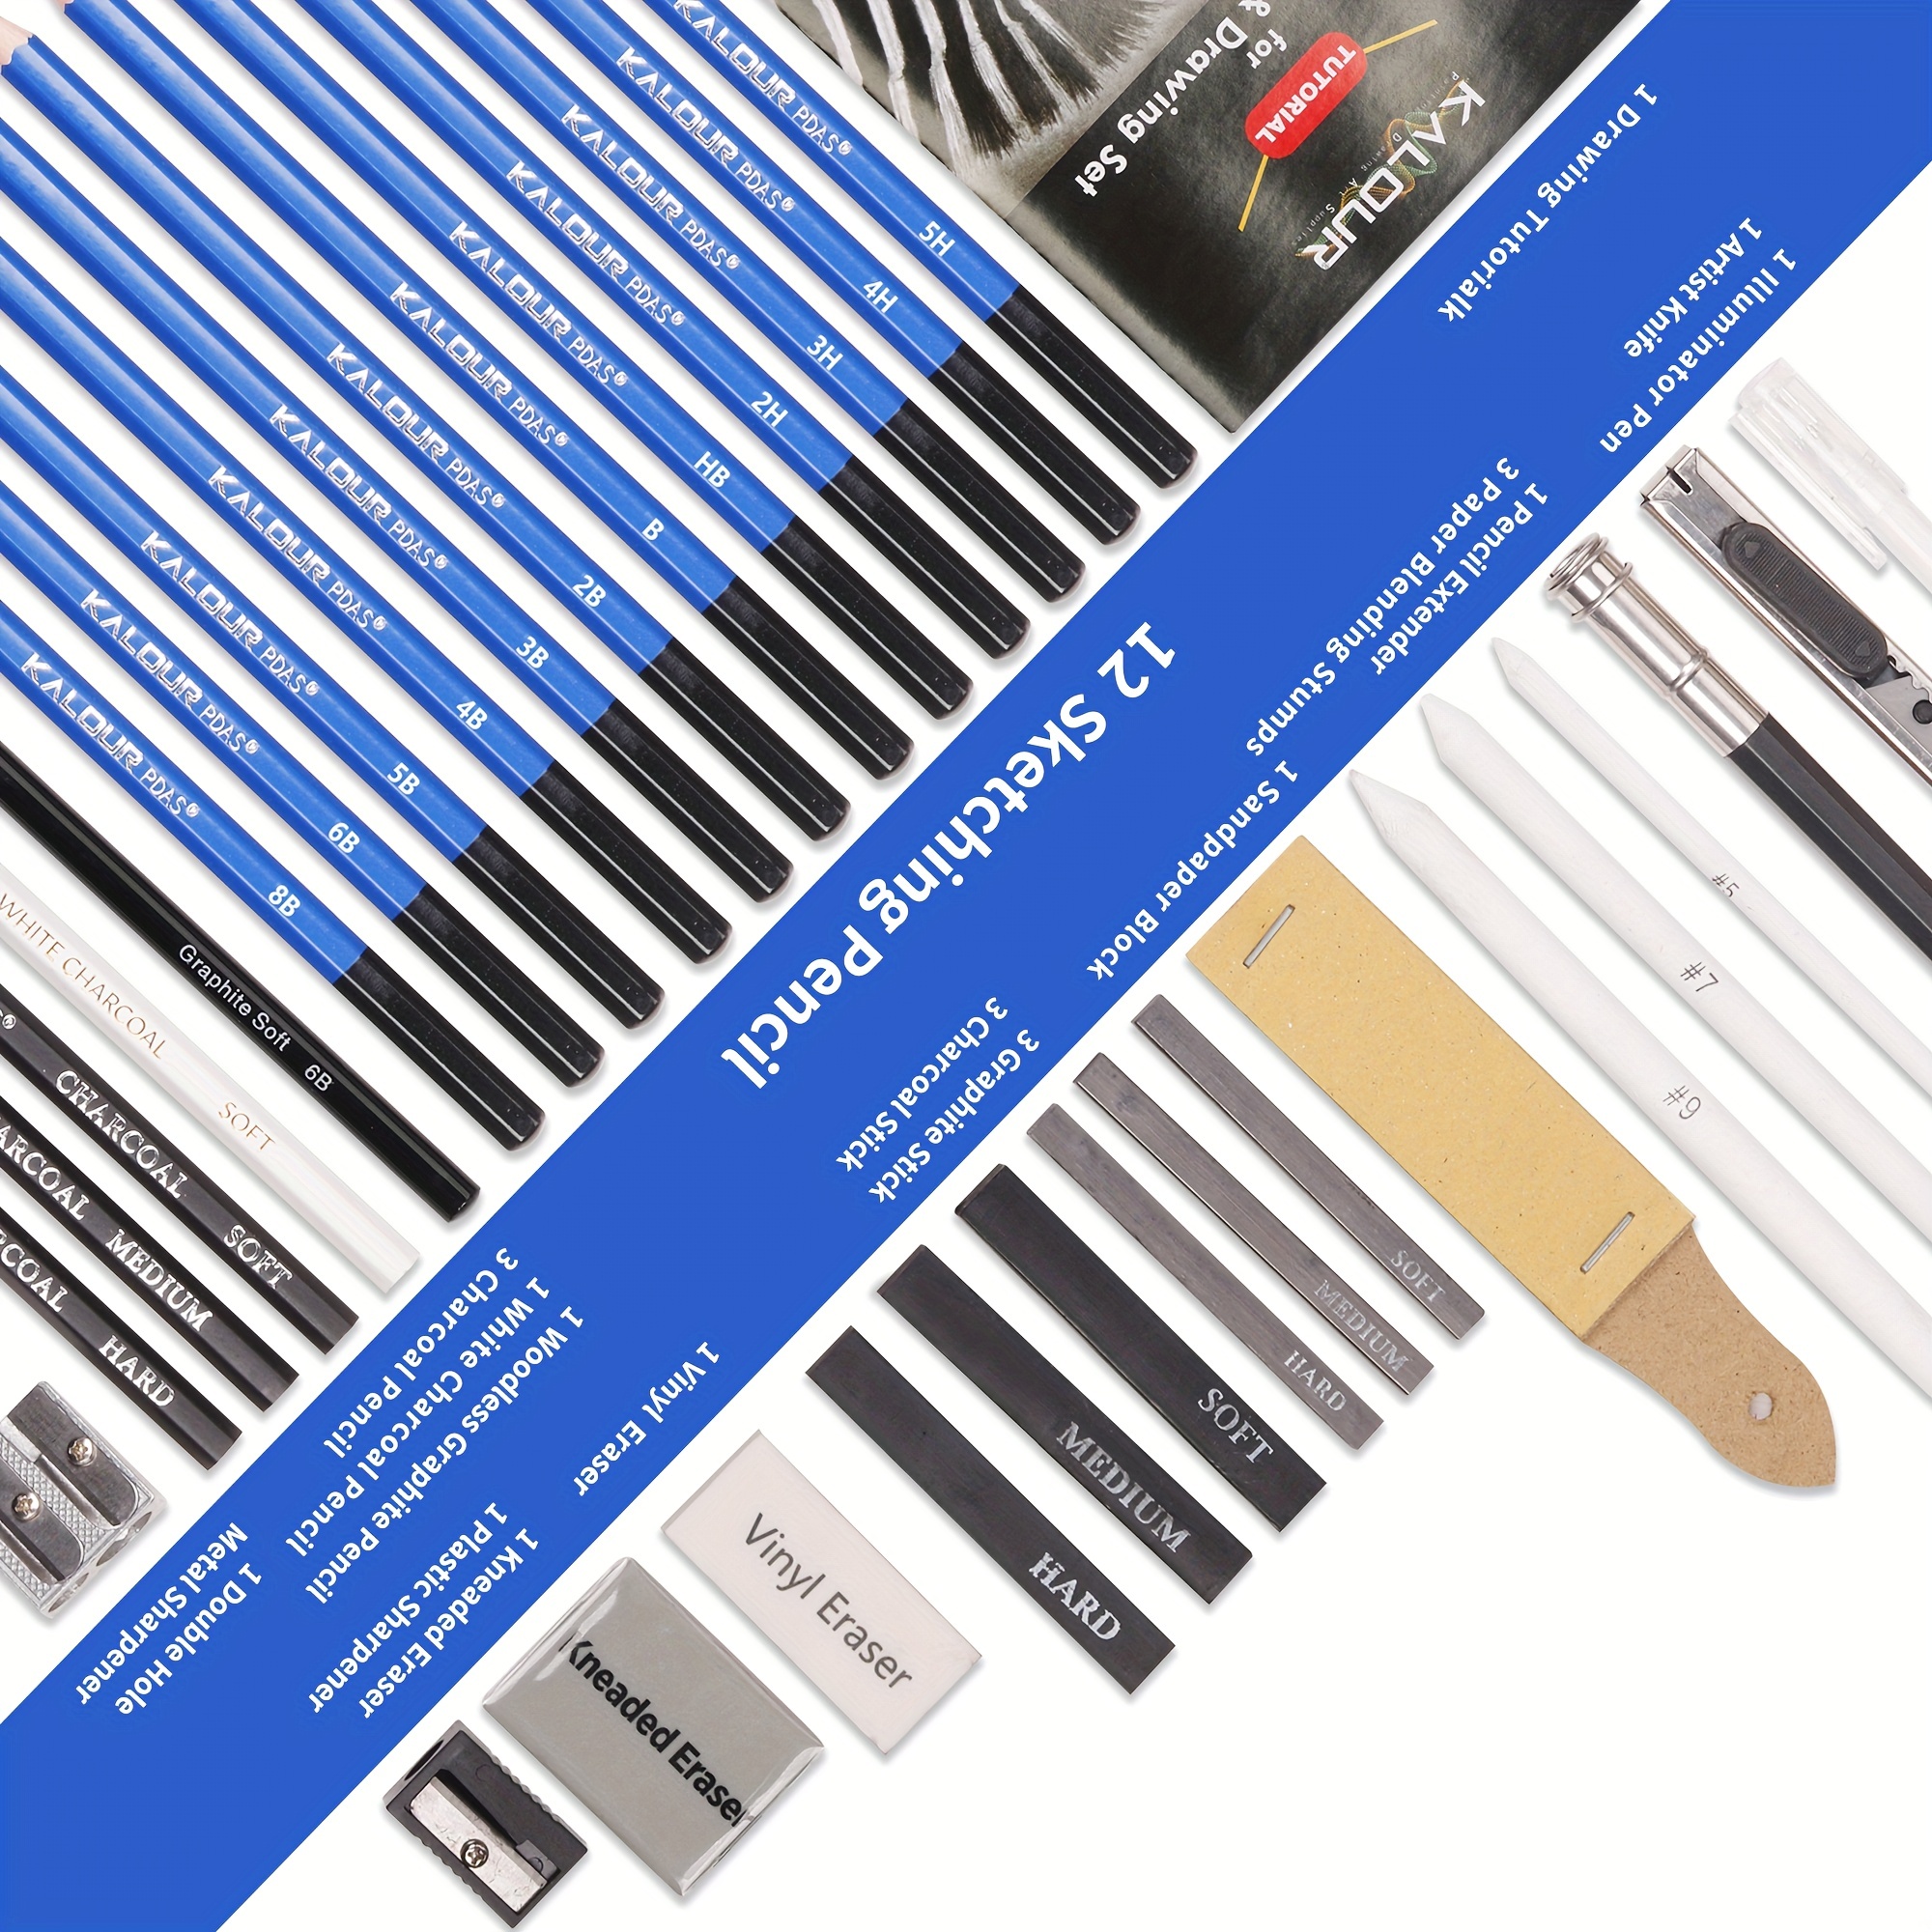 Castle Art Supplies 40 Piece Premium Drawing and Sketching Set With  Tutorial | For Artists, Professionals or Beginners | Pencils, Charcoal,  Graphite